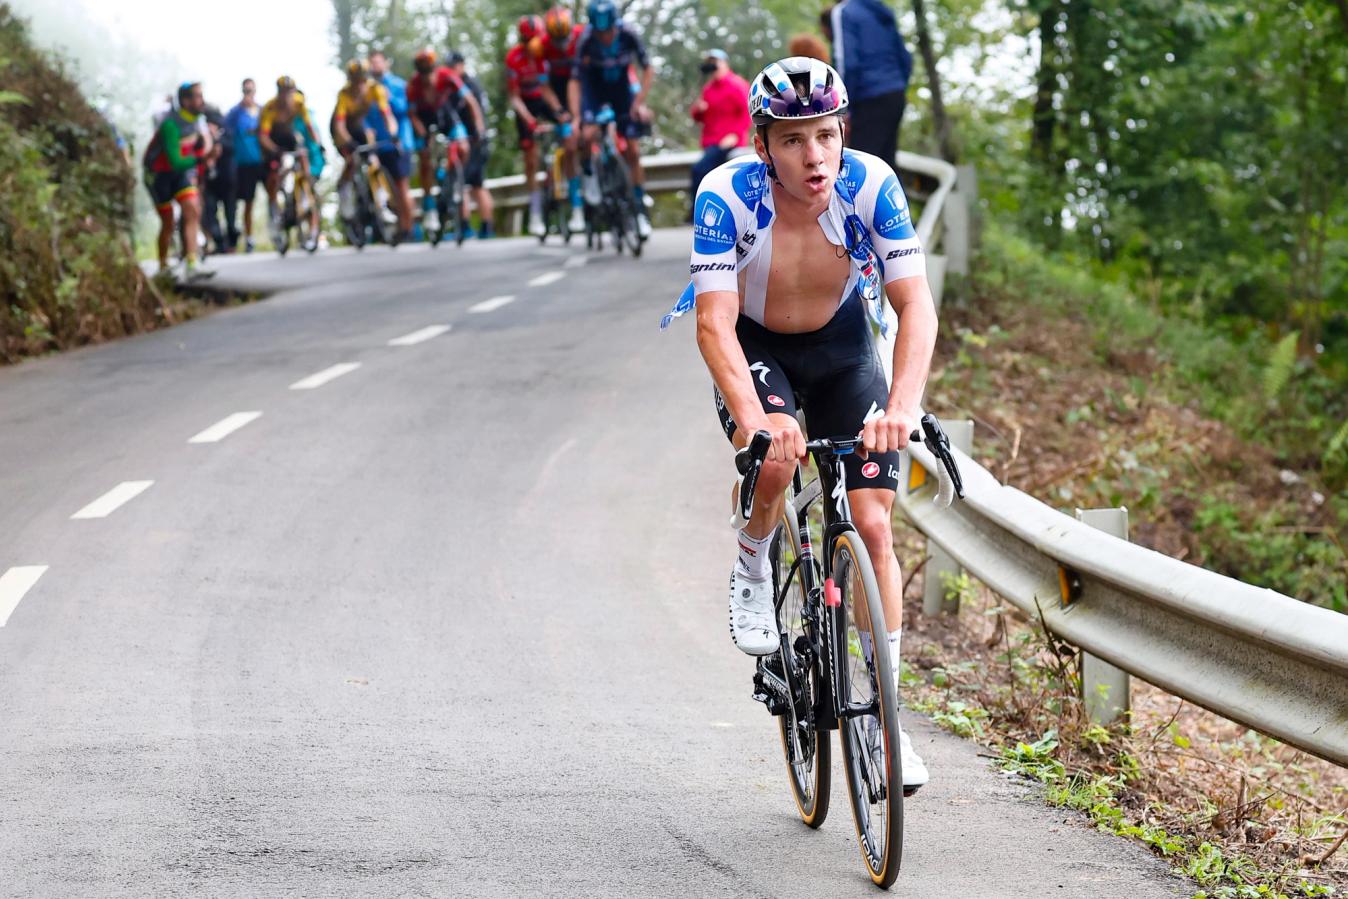 Not until he was swept up by Bahrain Victorious did Remco Evenepoel accept defeat on the Angliru